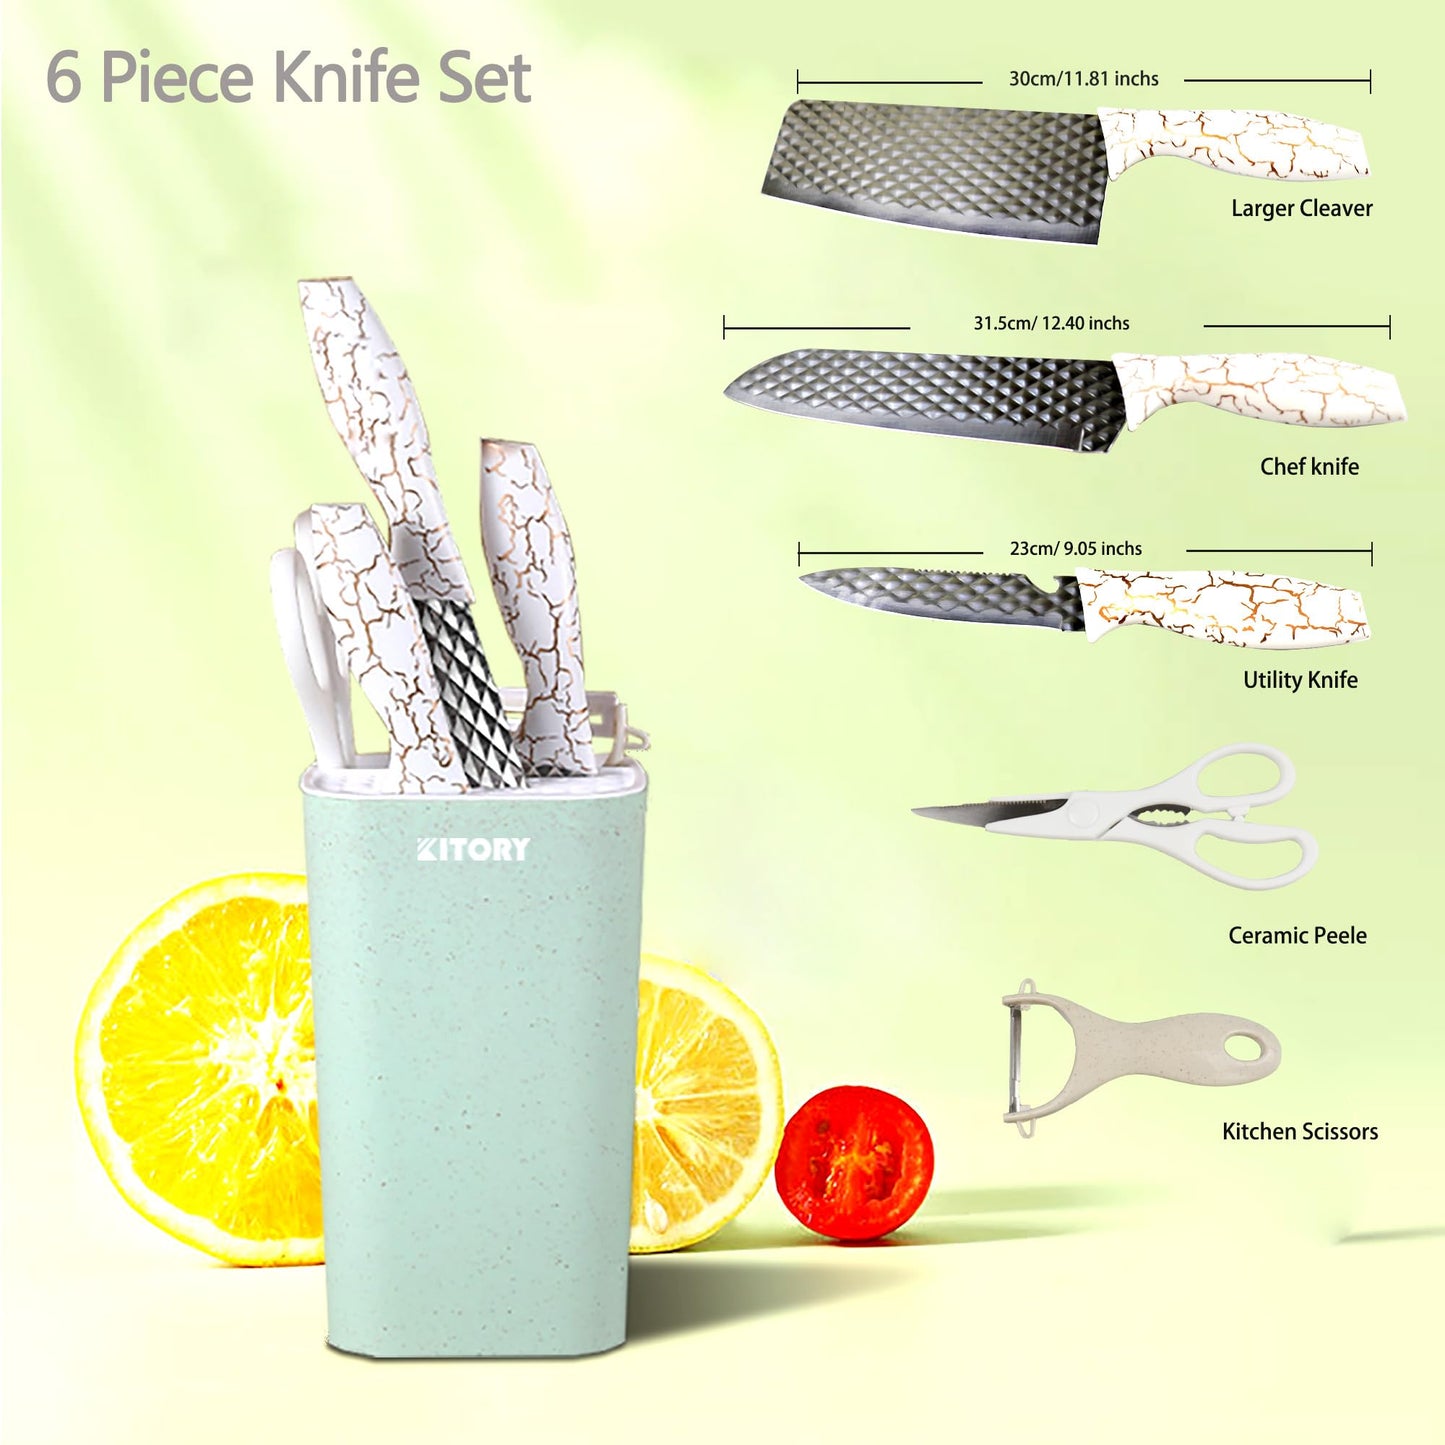 Kitory 6 Piece Cleaver Knife Set with Knife Block, White